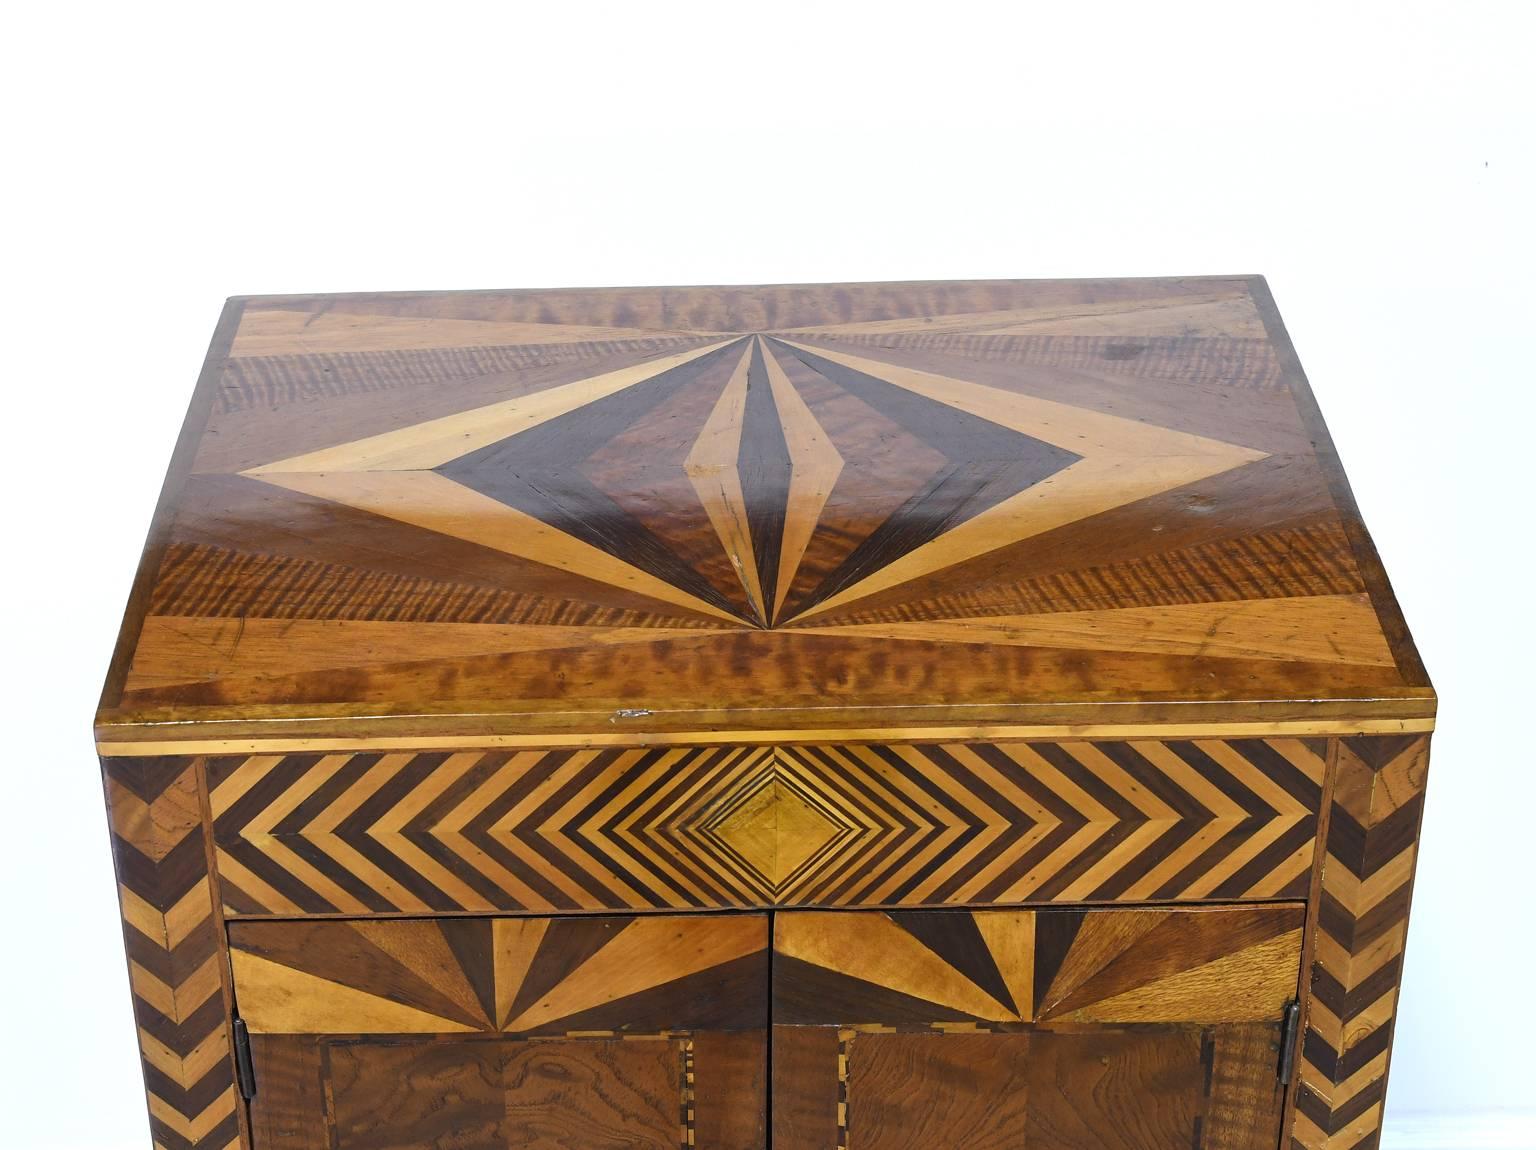 A very lovely Art Deco cabinet in mahogany and walnut with inlays in tigerwood and satinwood in a geometric pattern, offering two doors. American, circa 1920. 

Measures: 20 1/4